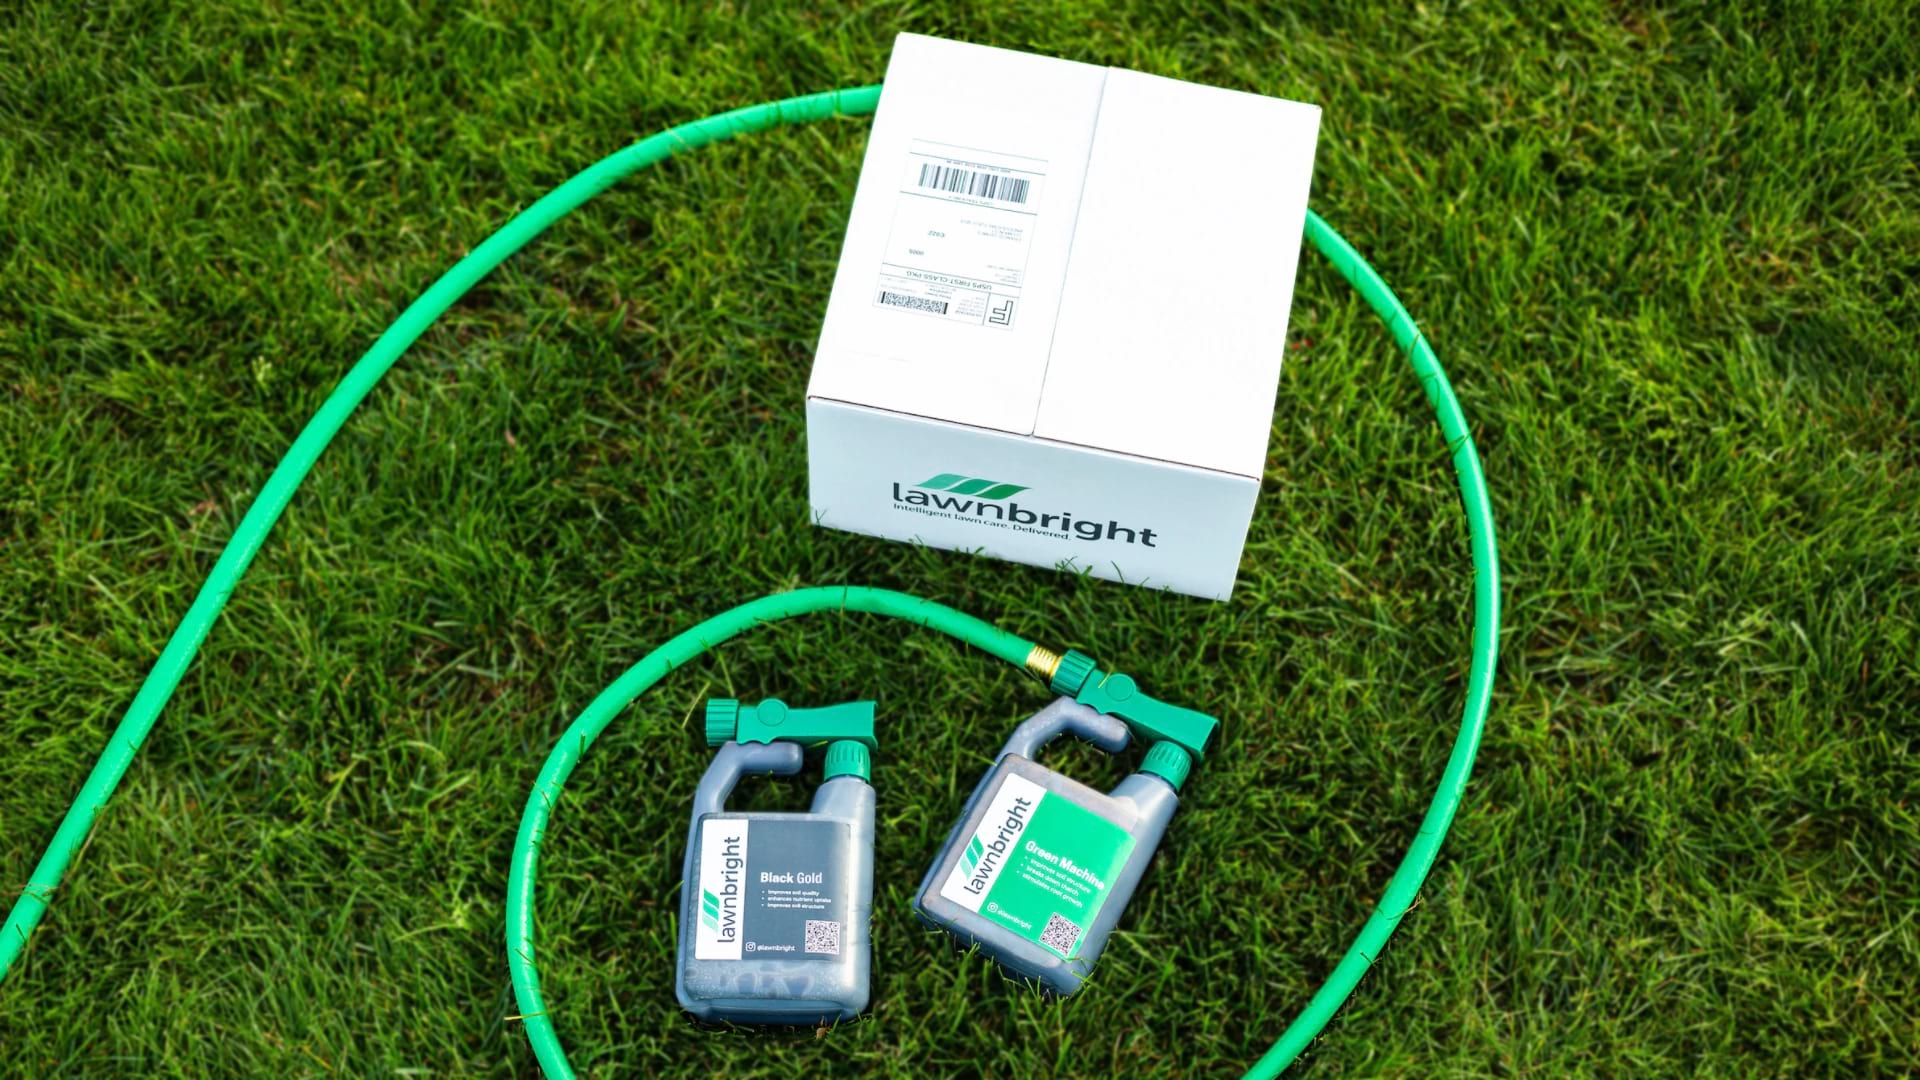 A shipping box, hose, and Lawnbright bottles displayed on green, healthy grass.